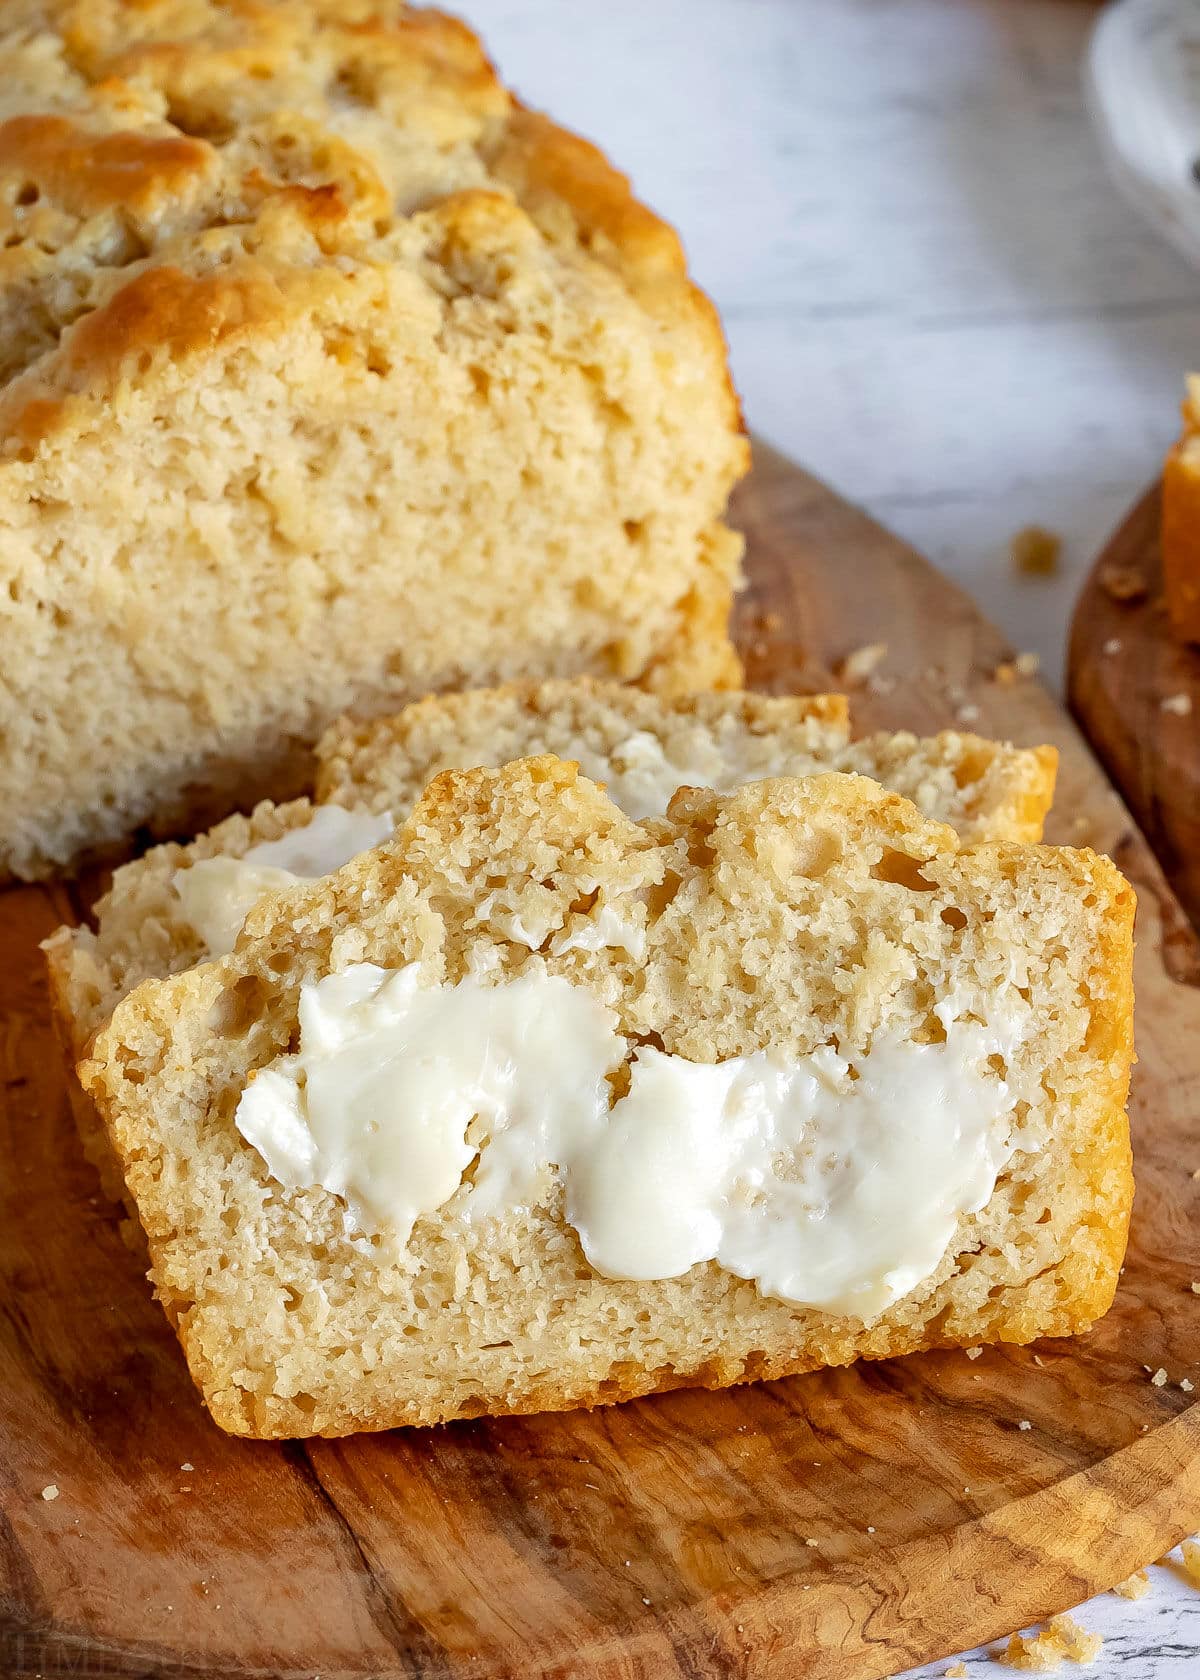 slice of beer bread with butter on it leaning up against loaf bread.